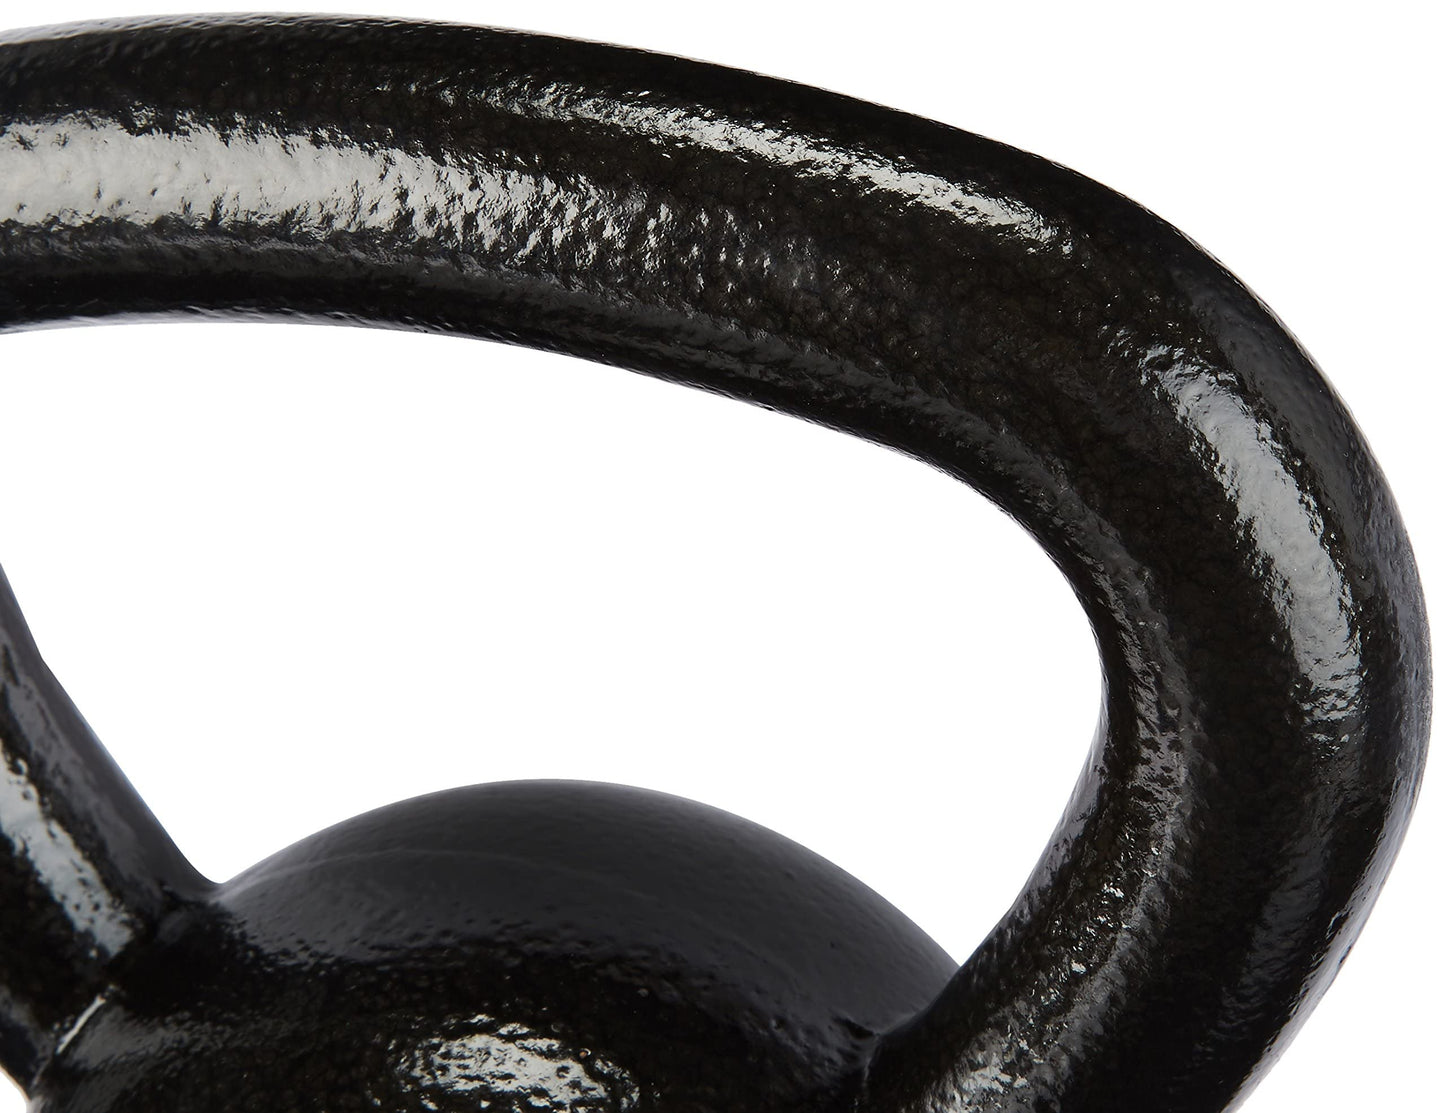 Amazon Basics Cast-Iron Kettlebell with Textured and Painted Surface, Black, 12kg / 26lbs